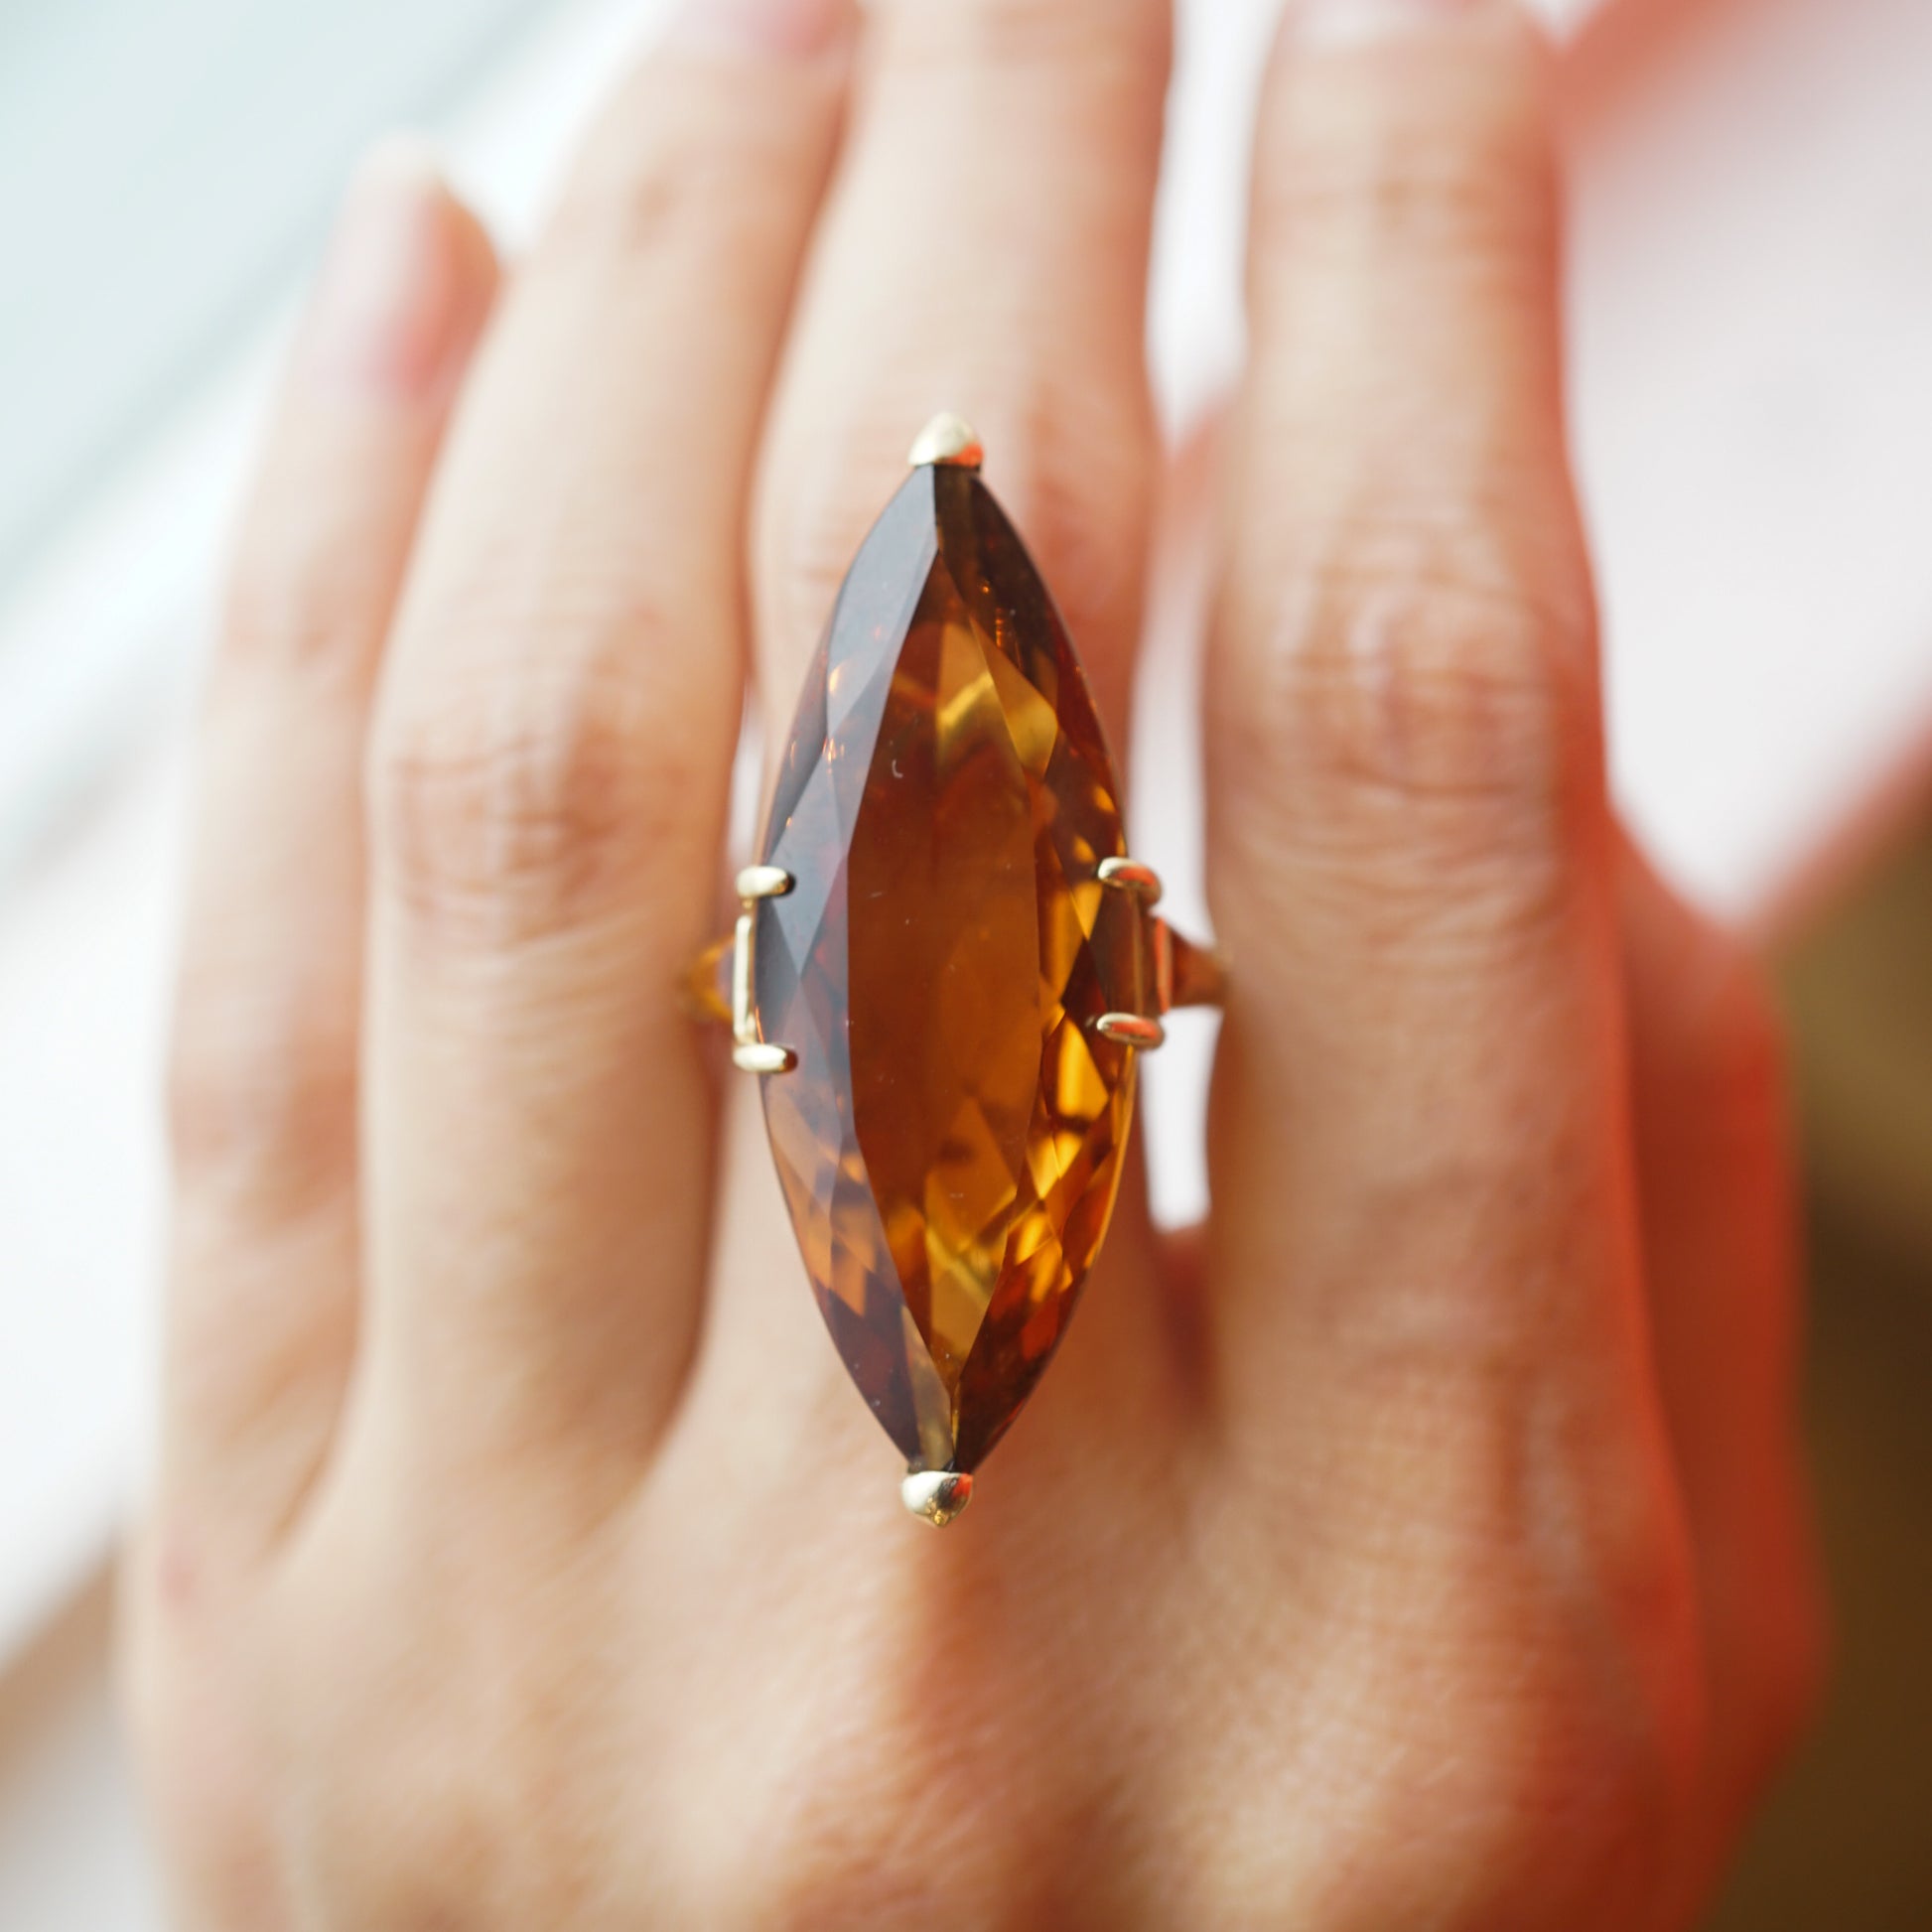 Marquise Cut Citrine Cocktail Ring in 14k Yellow GoldComposition: 14 Karat Yellow GoldRing Size: 8.5Total Gram Weight: 9.72 gInscription: 14k